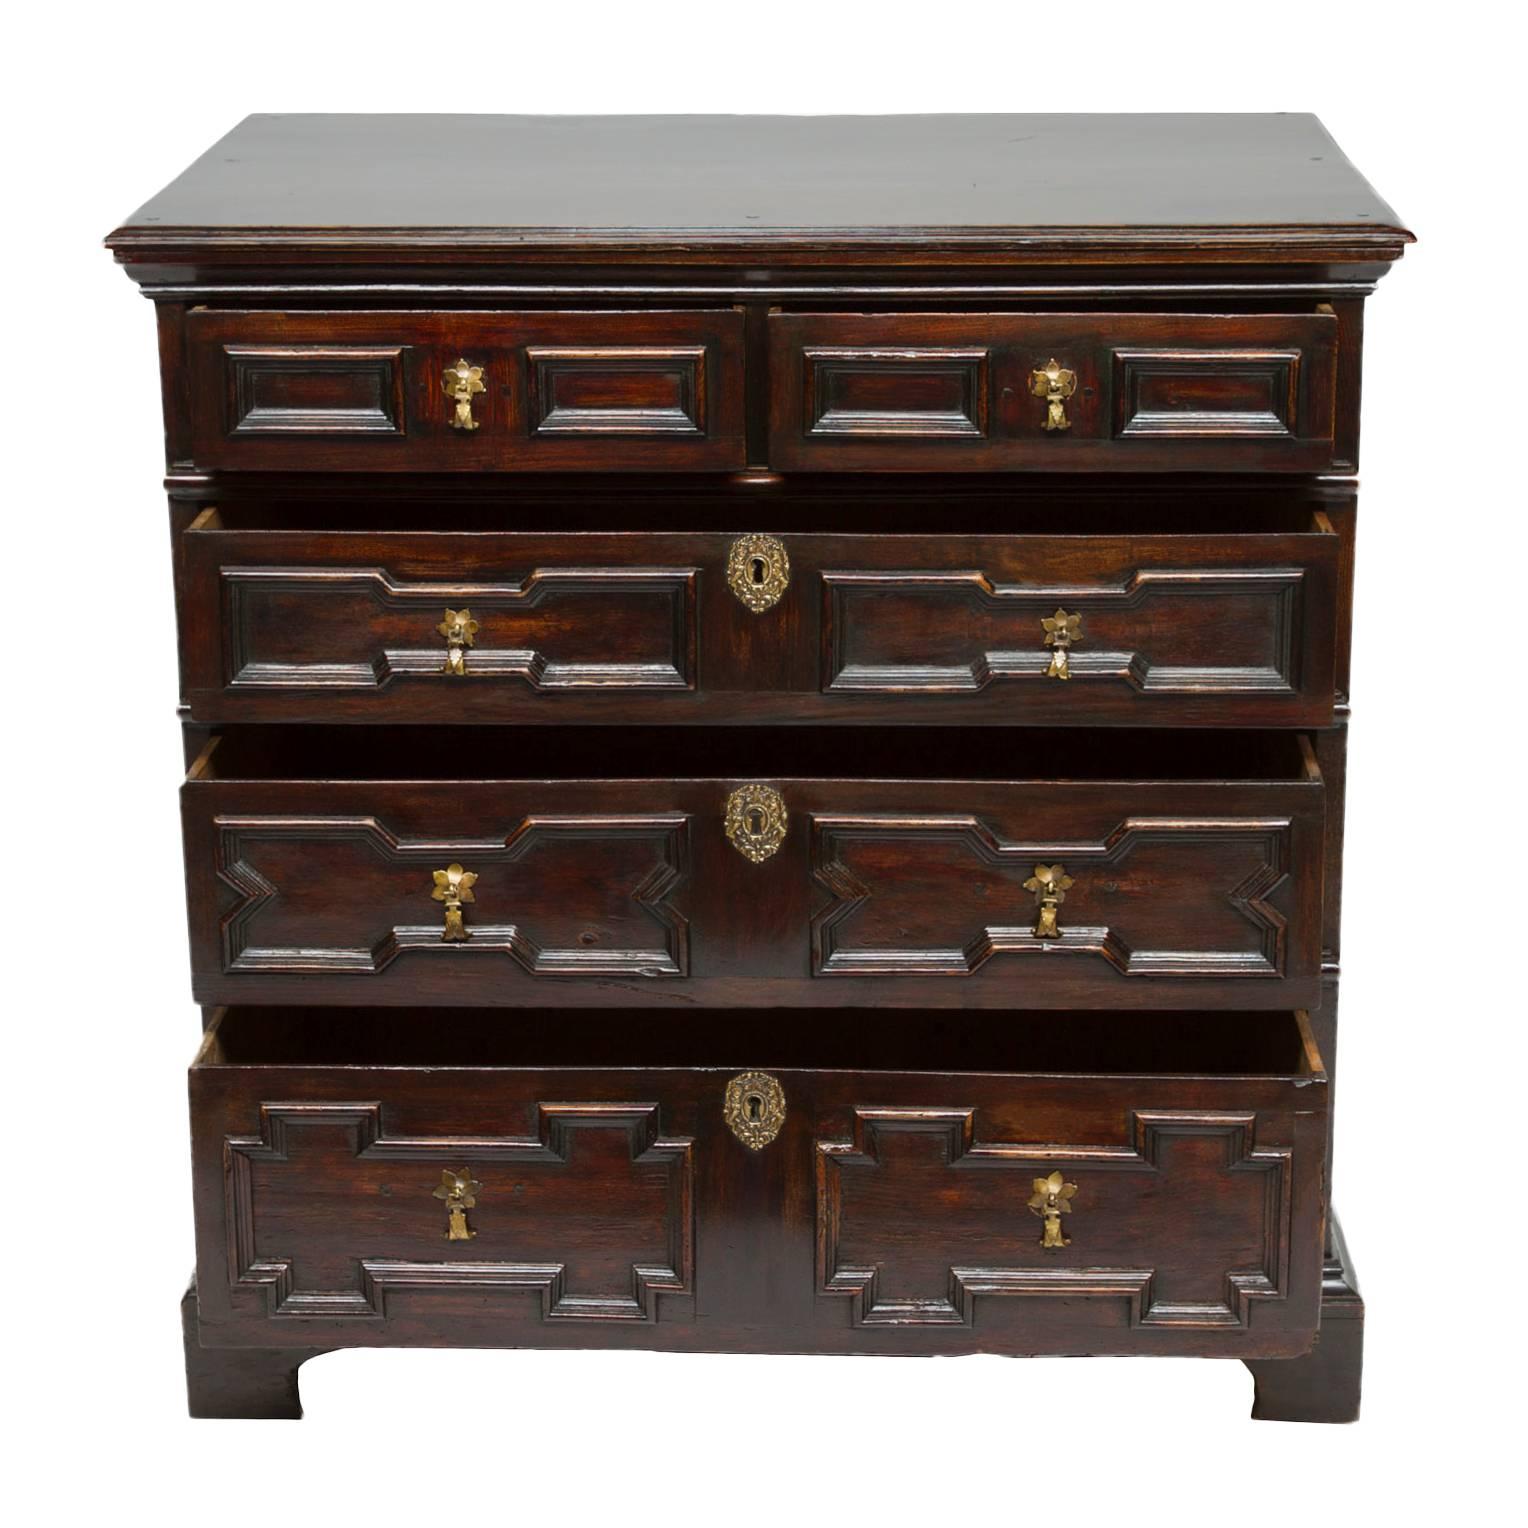 18th century English oak chest of drawers. A very nice oak chest drop pulls, molded fronts, drop pulls and panel sides. Resting on bracket feet. Excellent patina.